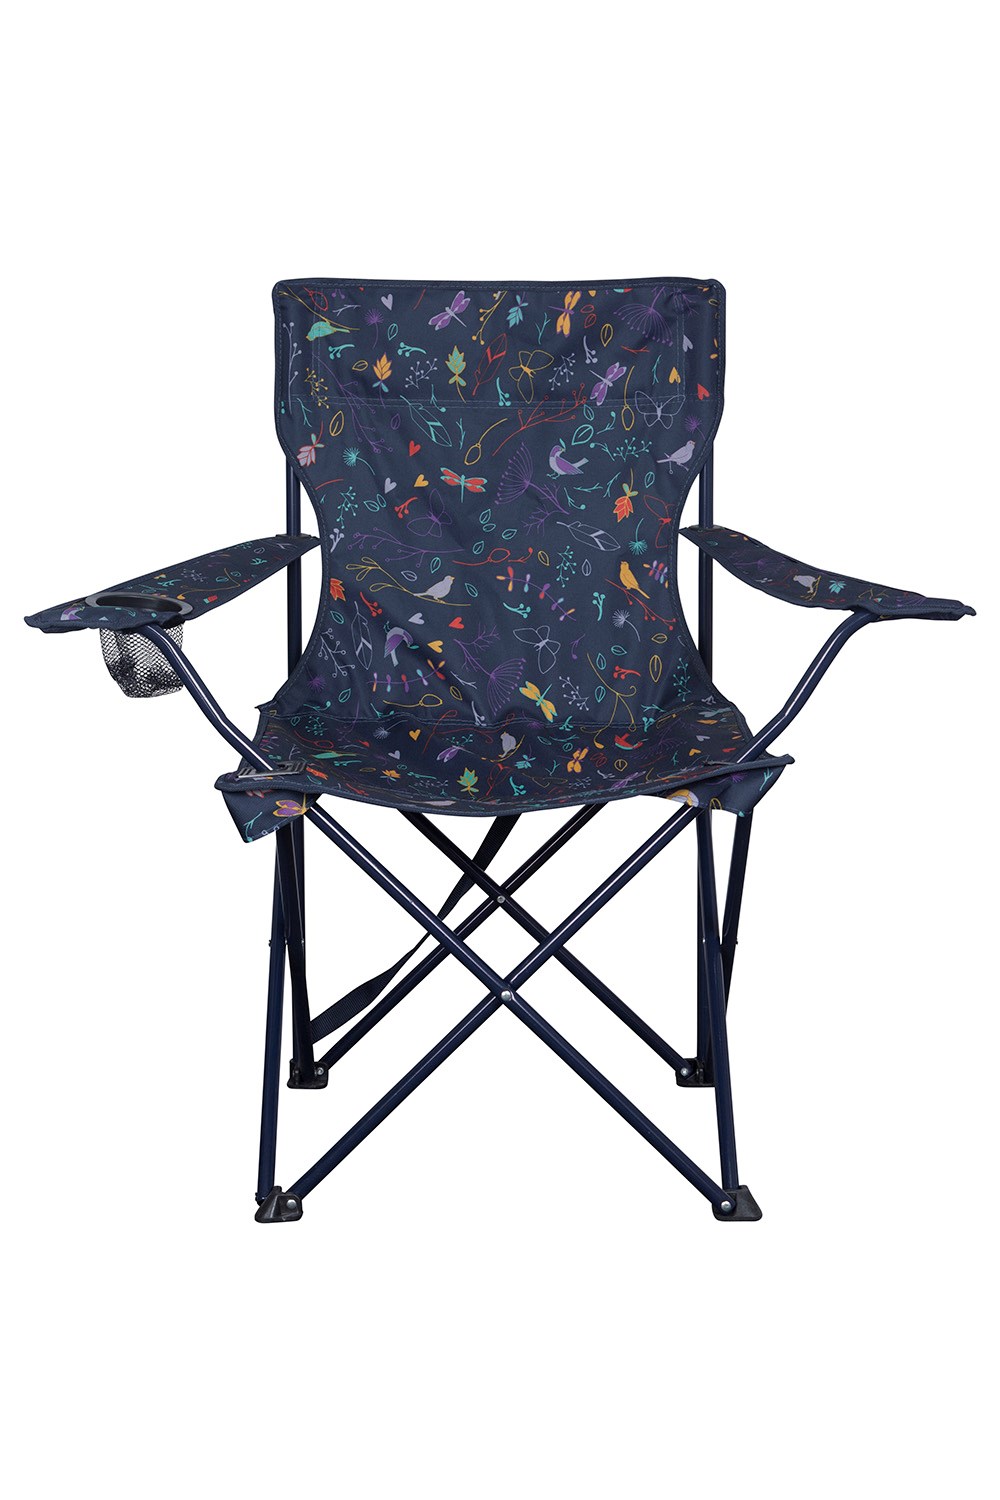 Camping Furniture Carry Strap Picnic Chair Mountain Warehouse Patterned ...